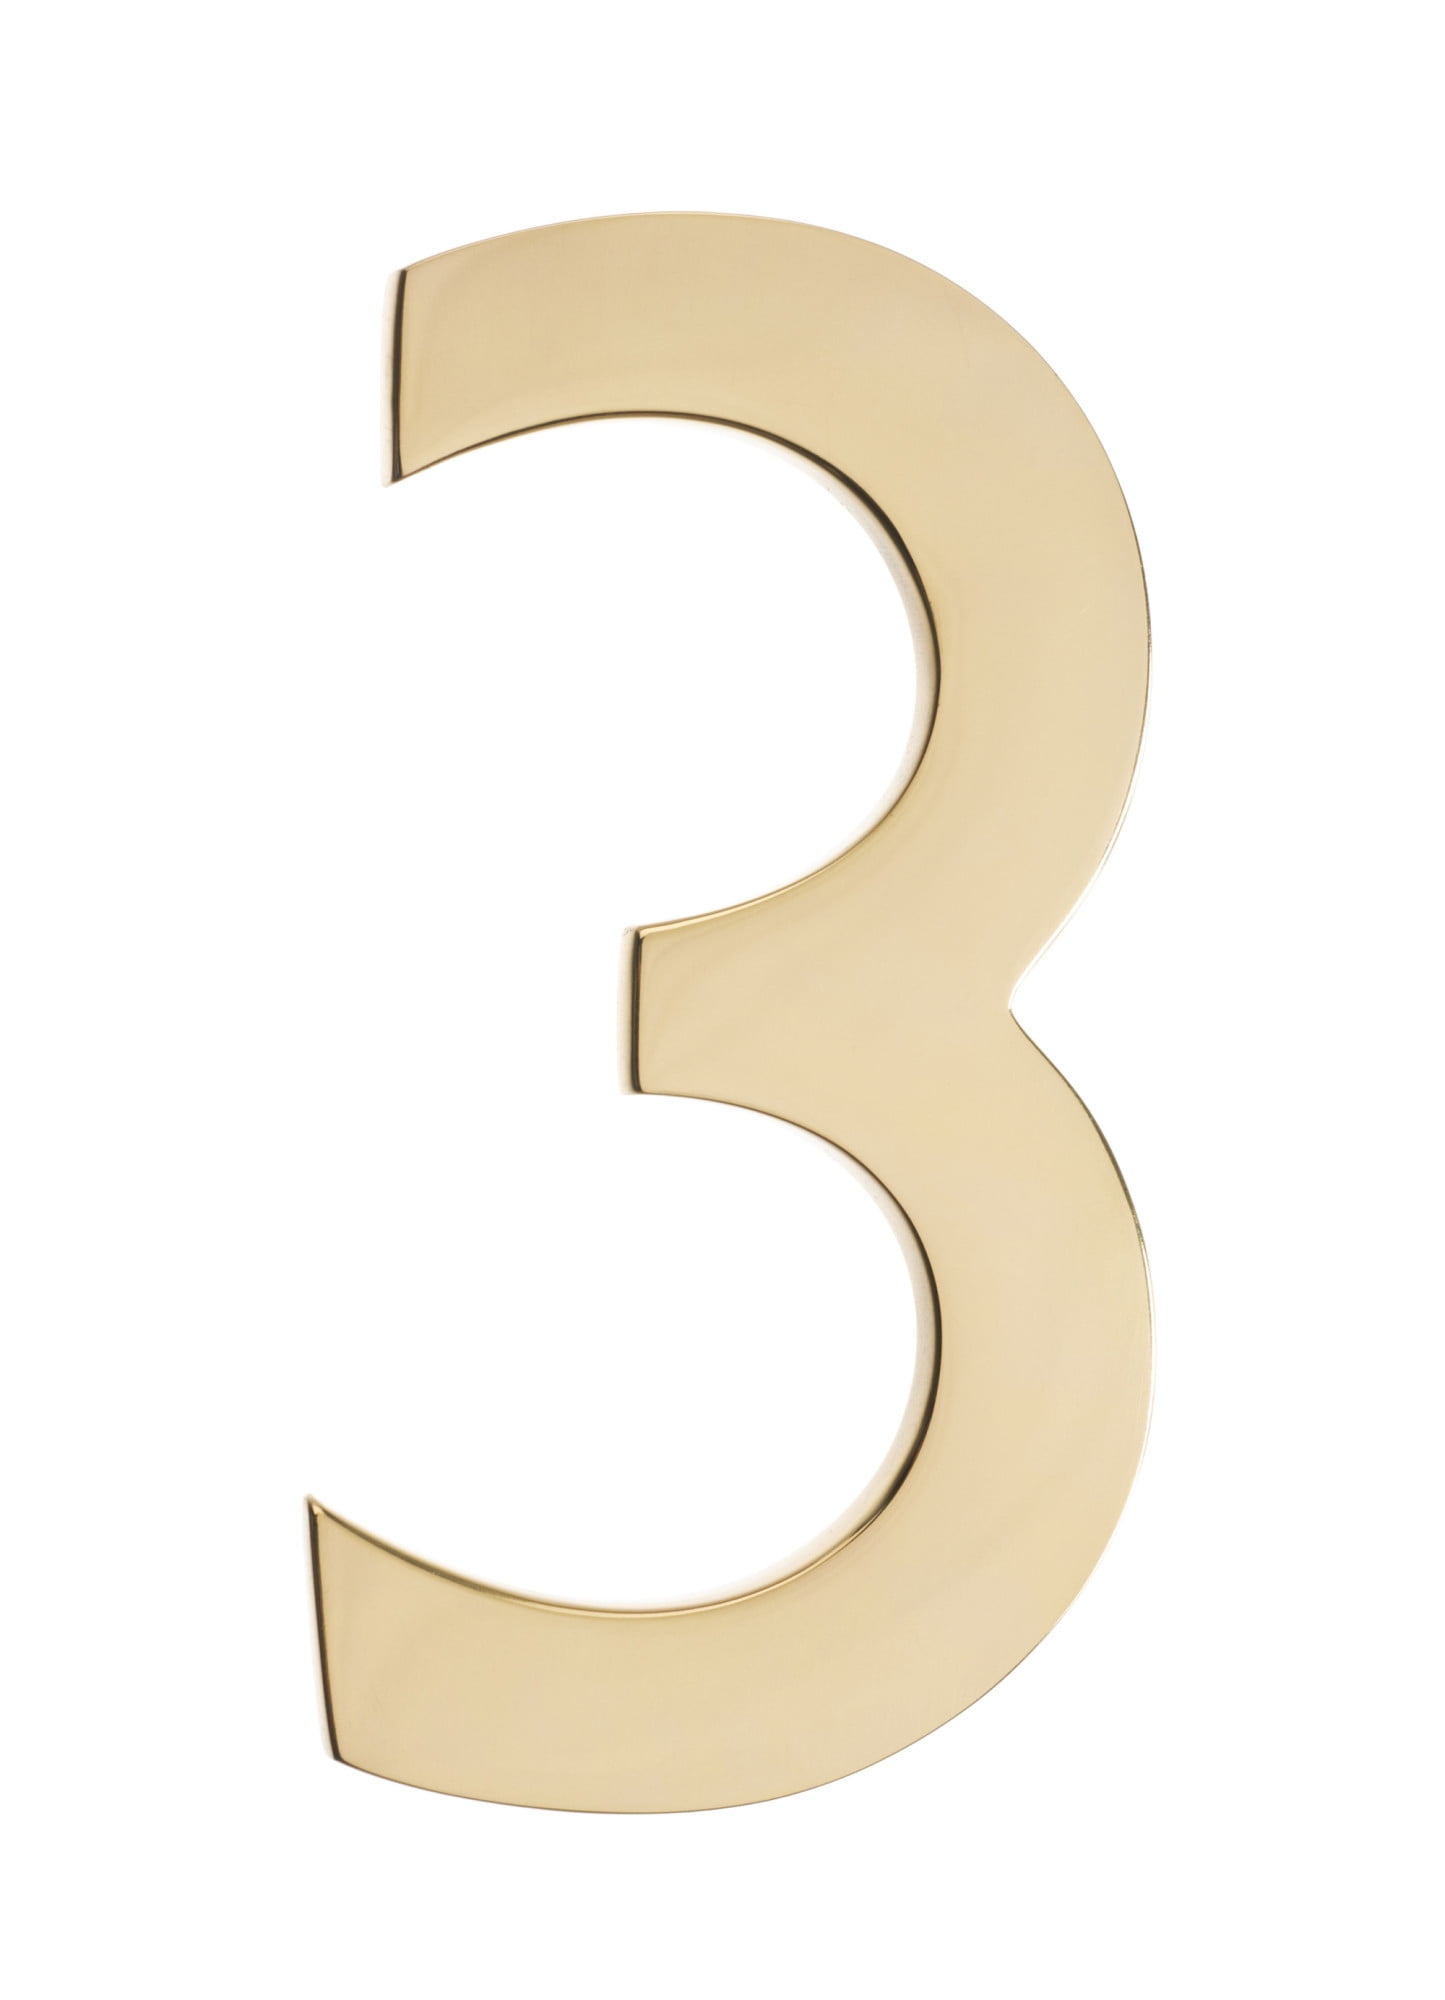 3585pb-3 House Number 3, Polished Brass - 5 In.